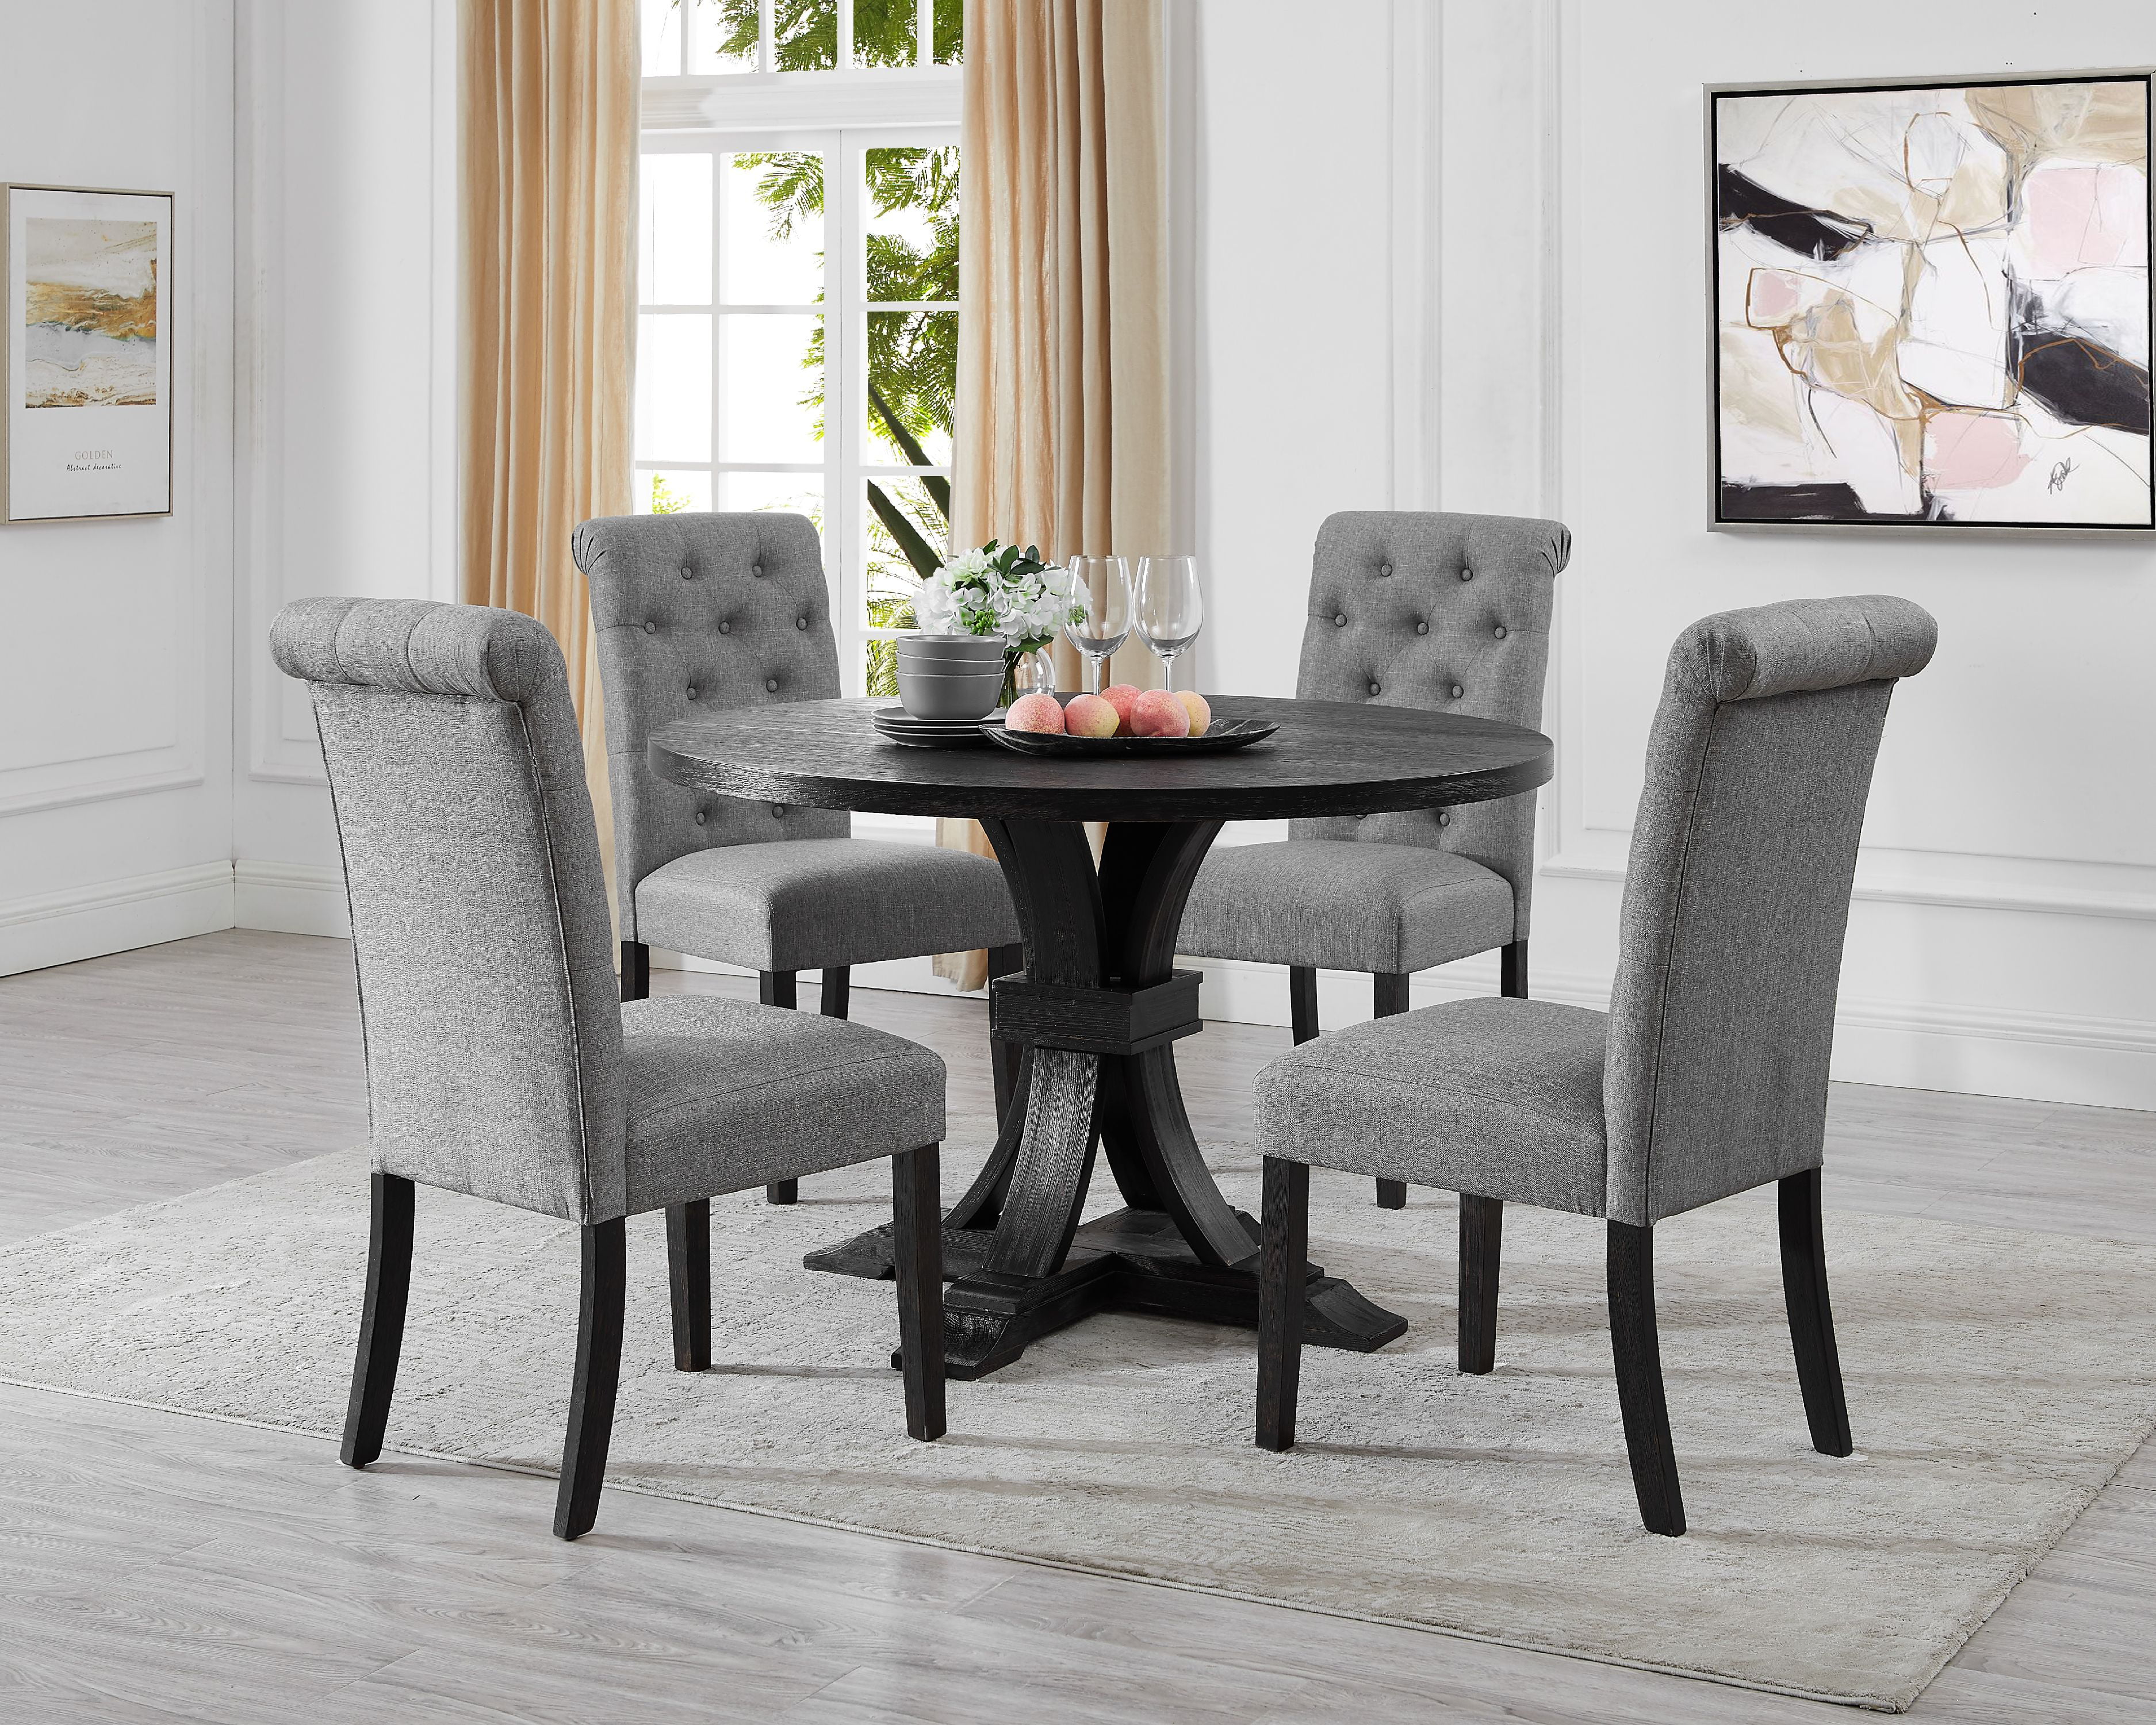 Siena Distressed Black Finish 5 Piece, Off White Distressed Round Dining Table